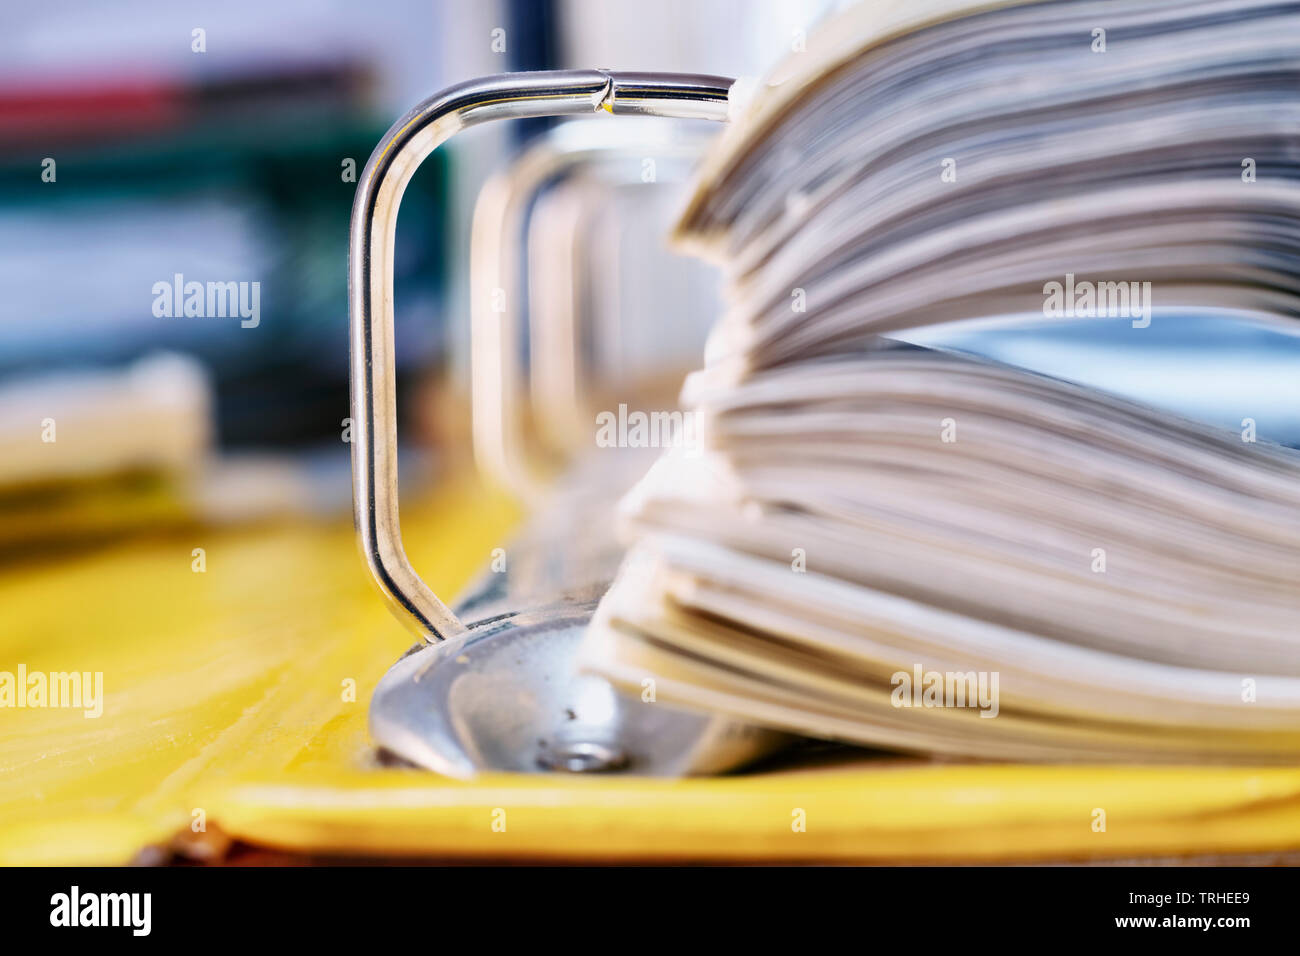 Open yellow binder close up , stack of white papers and bright metal rings , in the background office folders Stock Photo